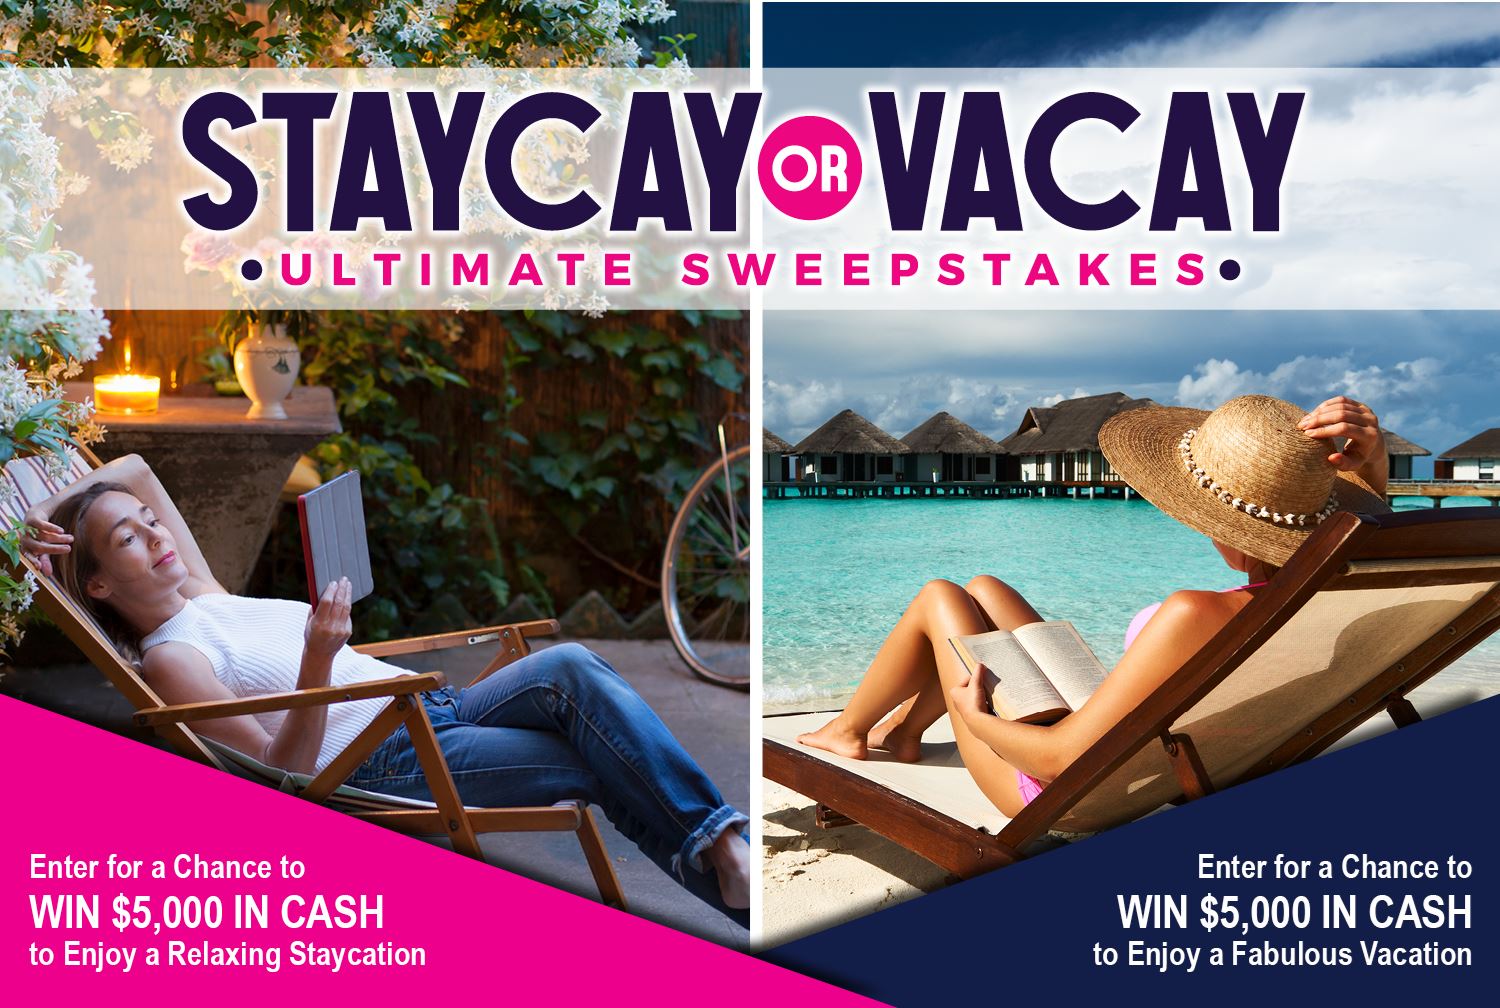 Staycay or Vacay Sweepstakes